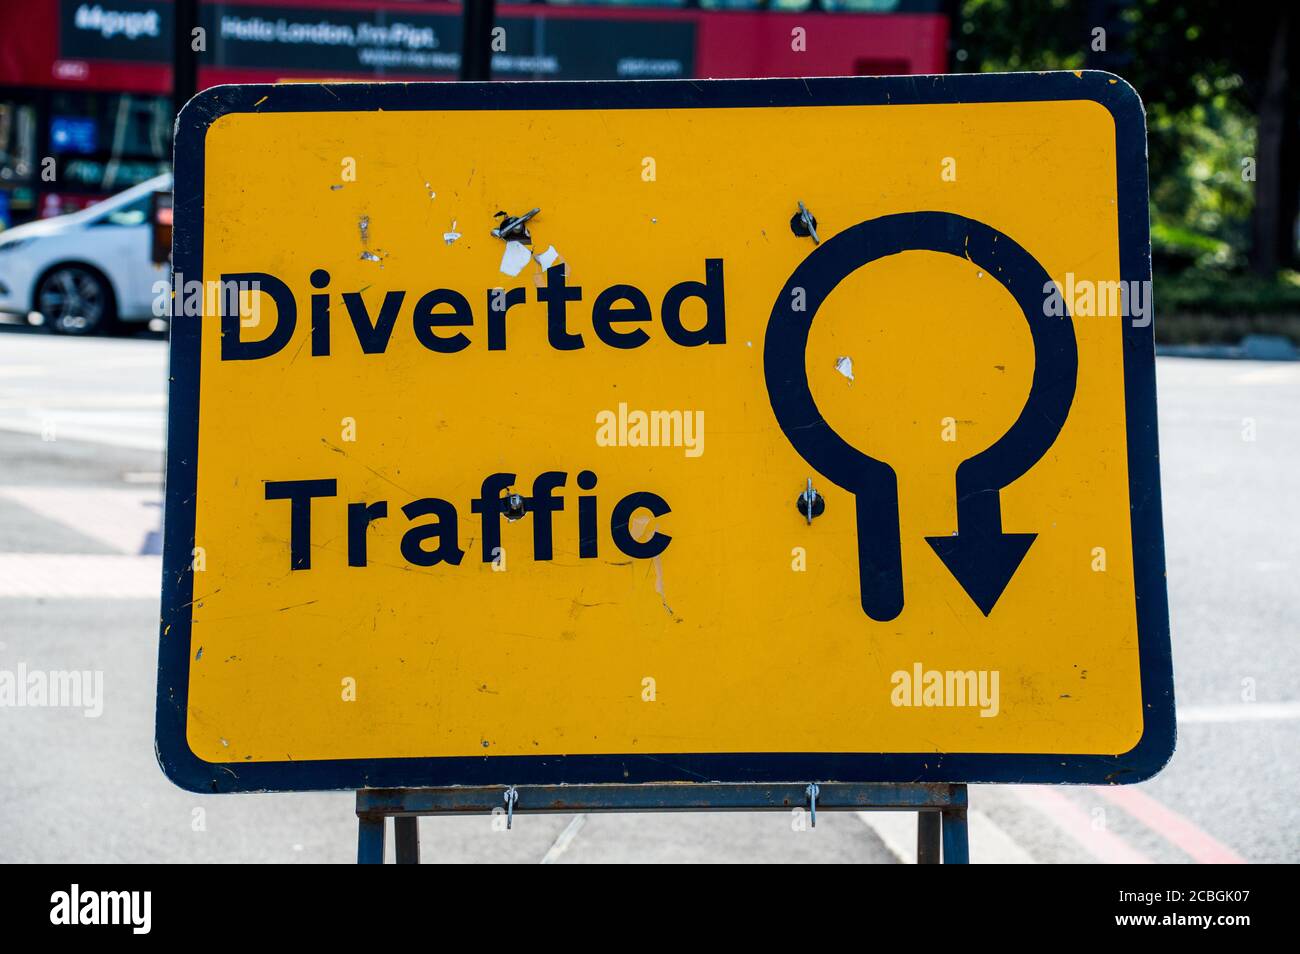 Diverted Traffic sign board to go around in round about Stock Photo